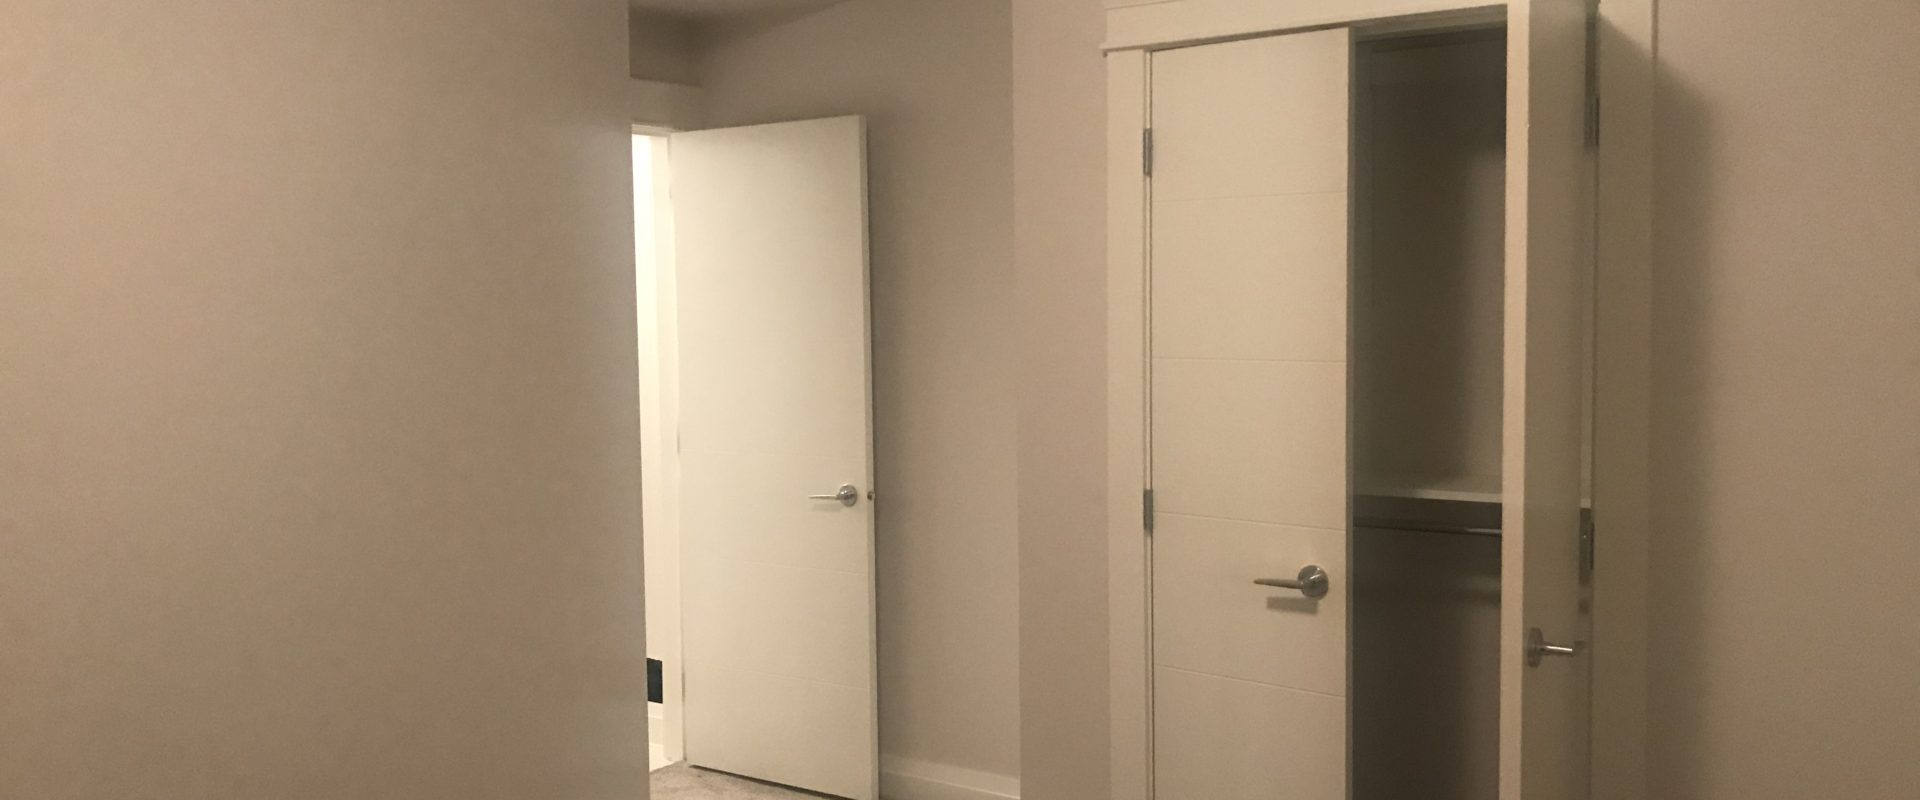 Burnaby North brand new 2br 1ba basement suite for rent! Close to SFU!